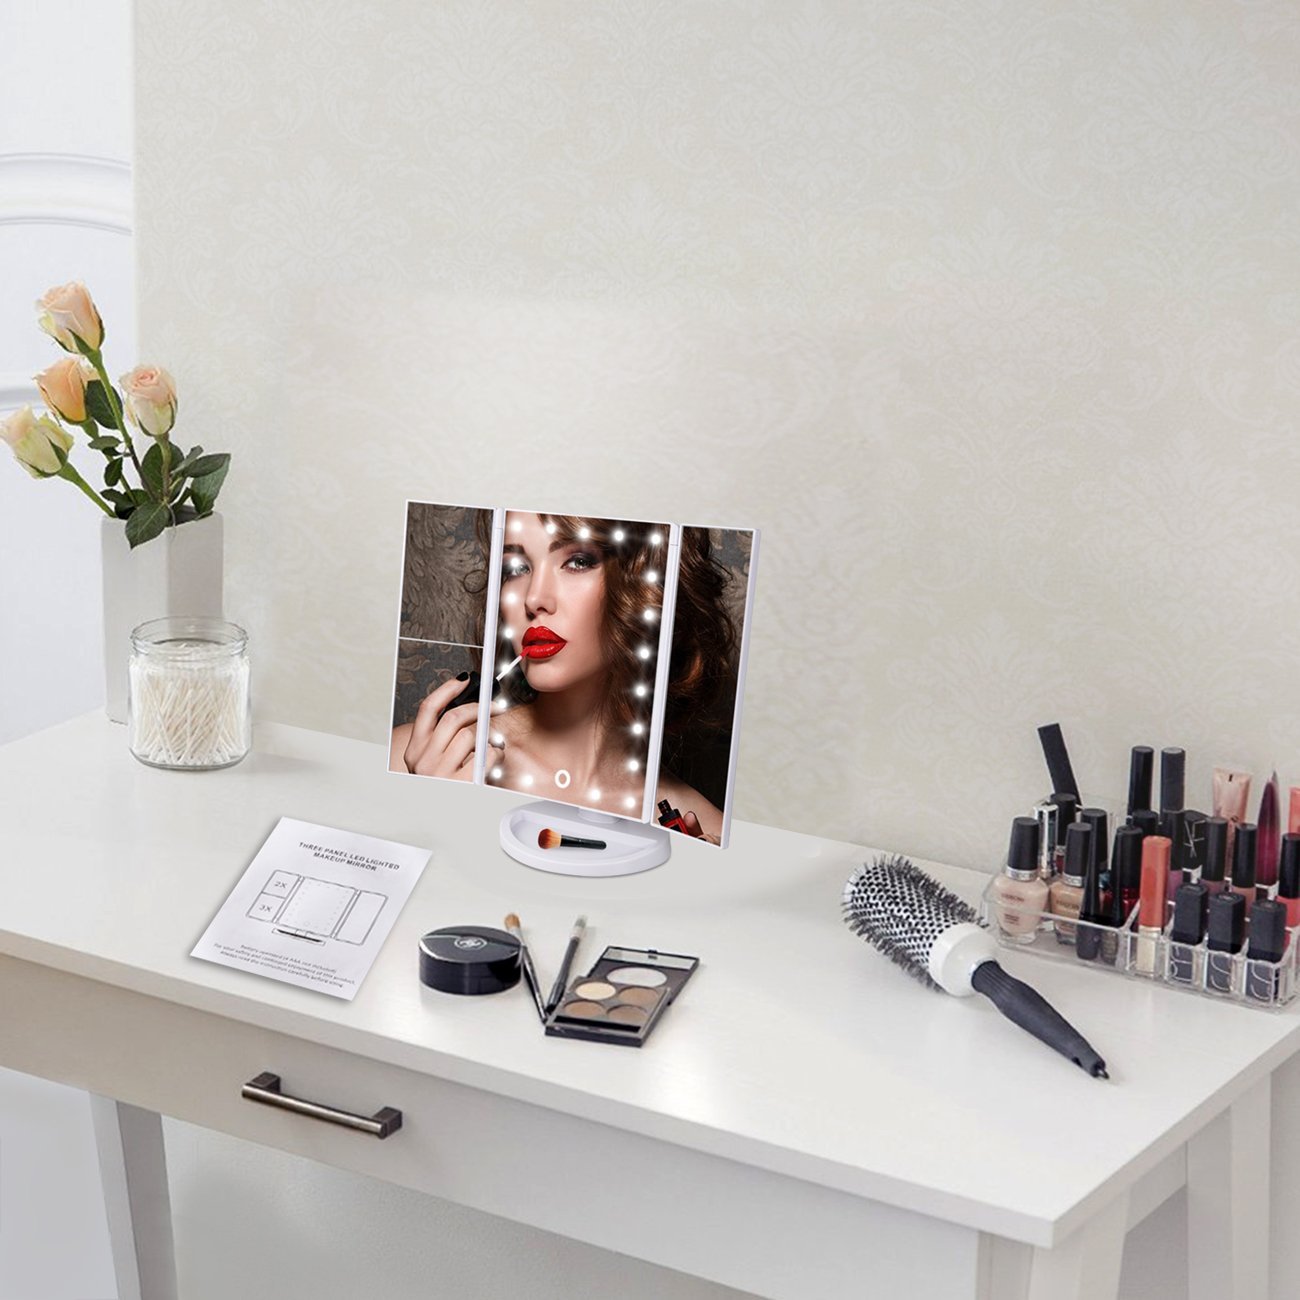 Top 5 budget vanity mirrors with lights